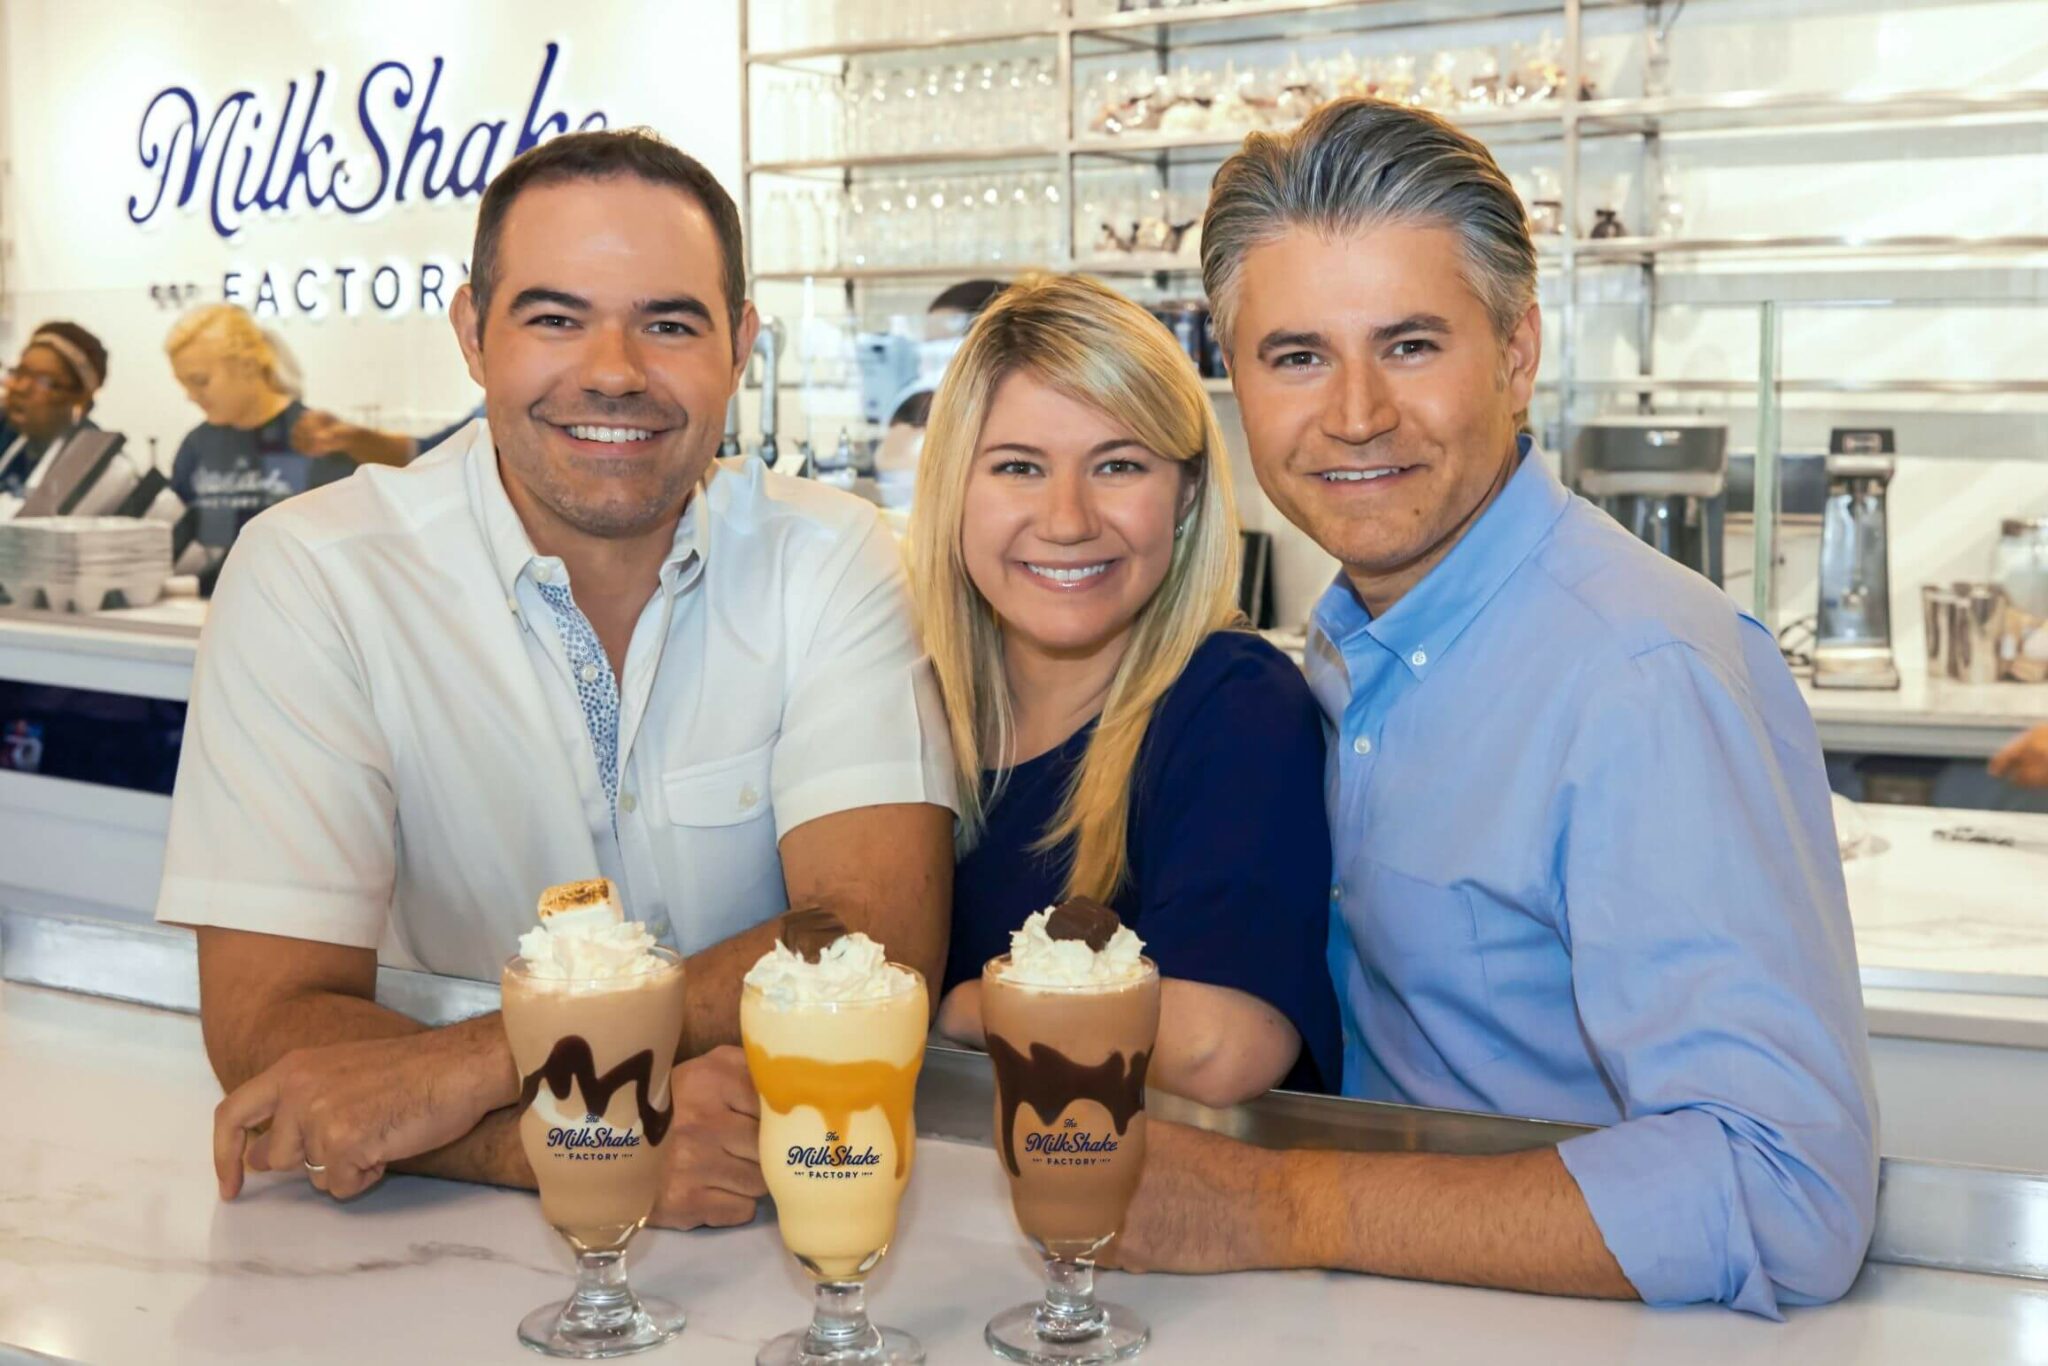 The founding team of MilkShake Factory, a chocolate and dessert franchise, smiling.